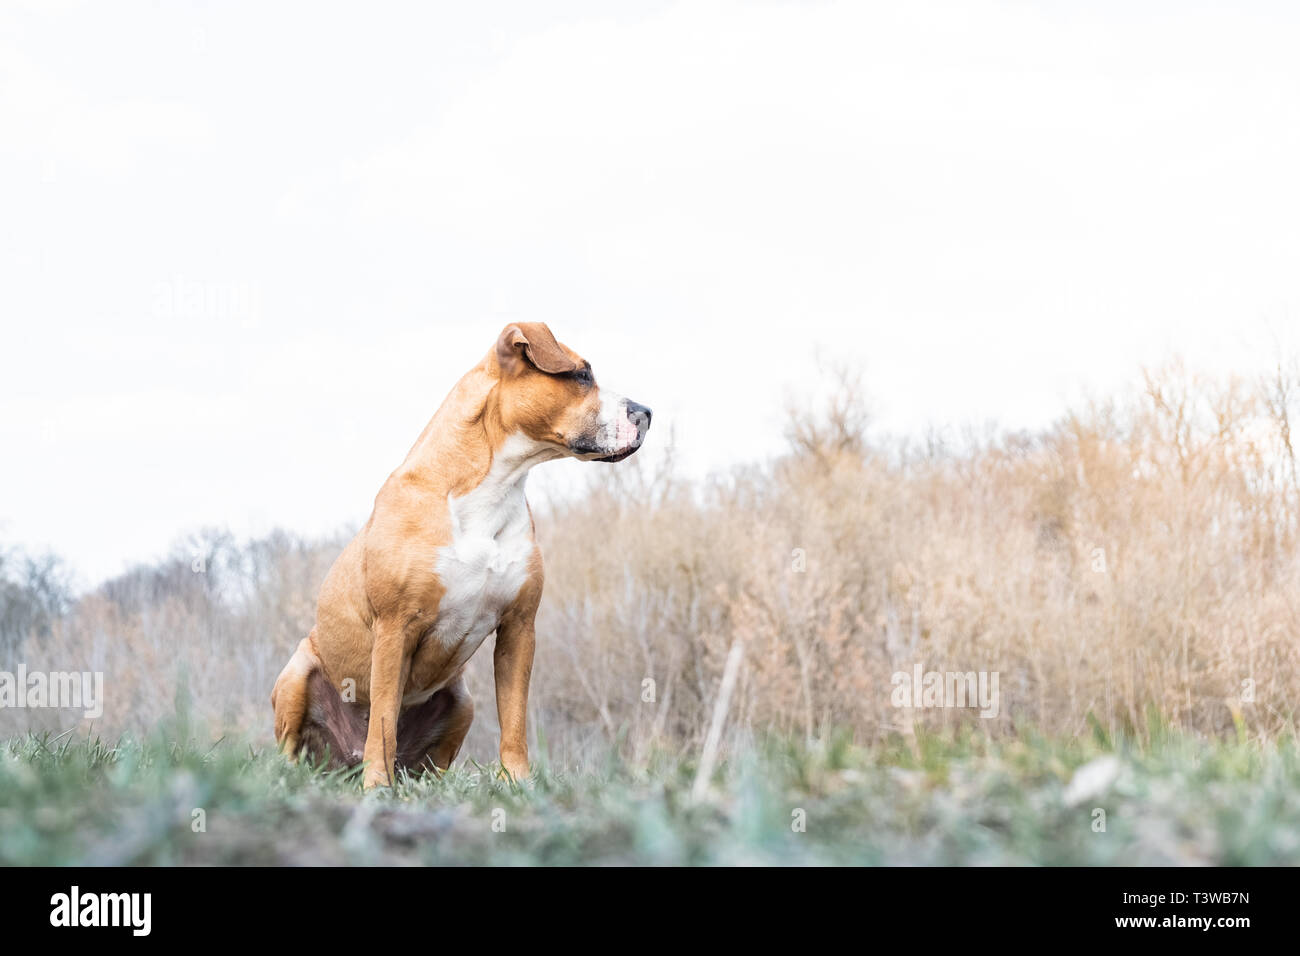 Portrait of a dog in nature. Staffordshire terrier dog enjoys beautiful spring day in a meadow or a park, hero shot view Stock Photo